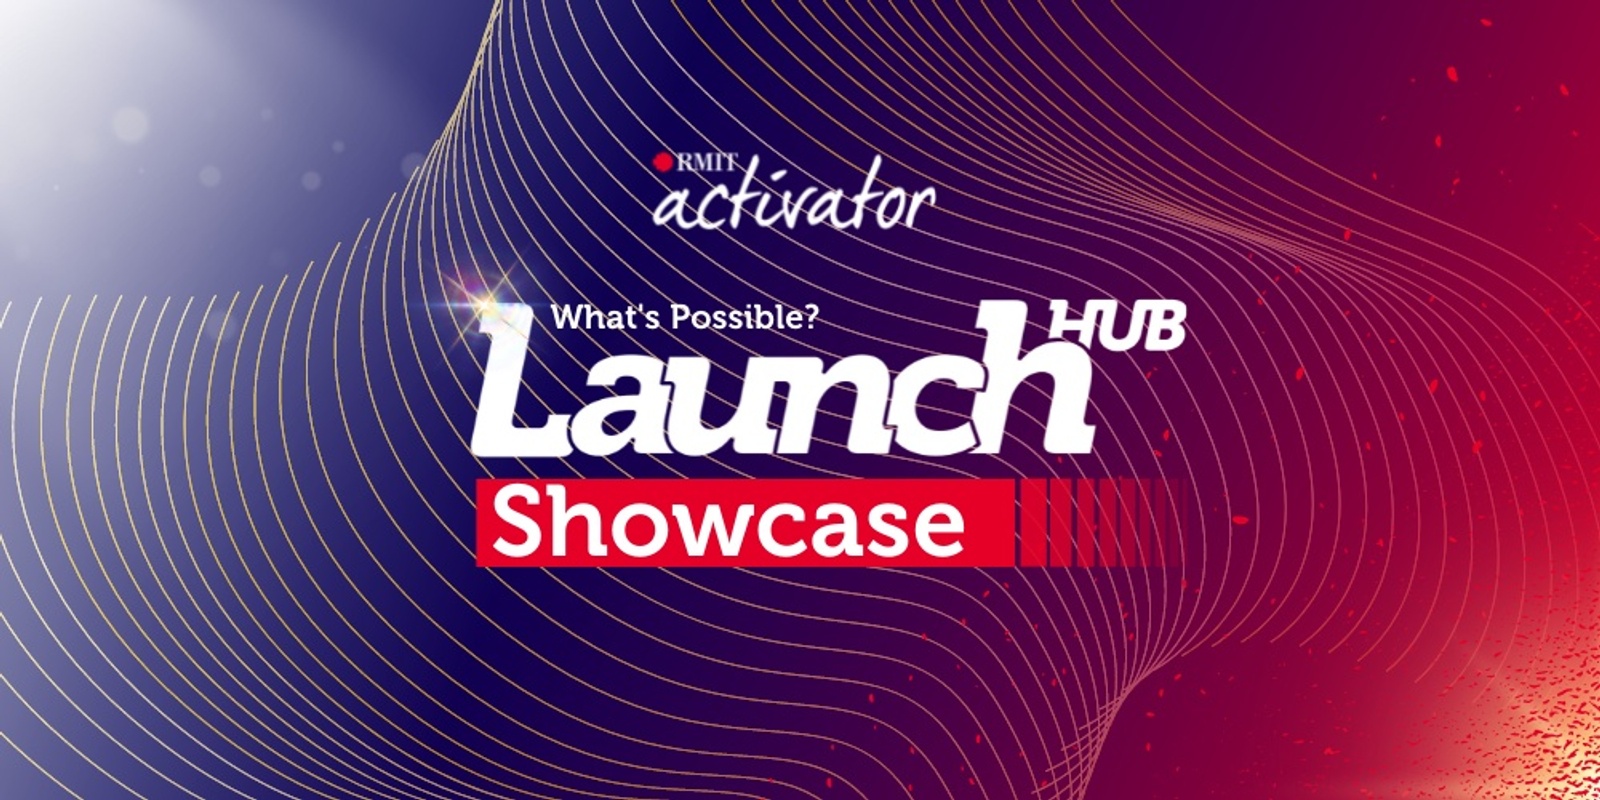 Banner image for What's Possible? LaunchHUB Showcase | RMIT Activator